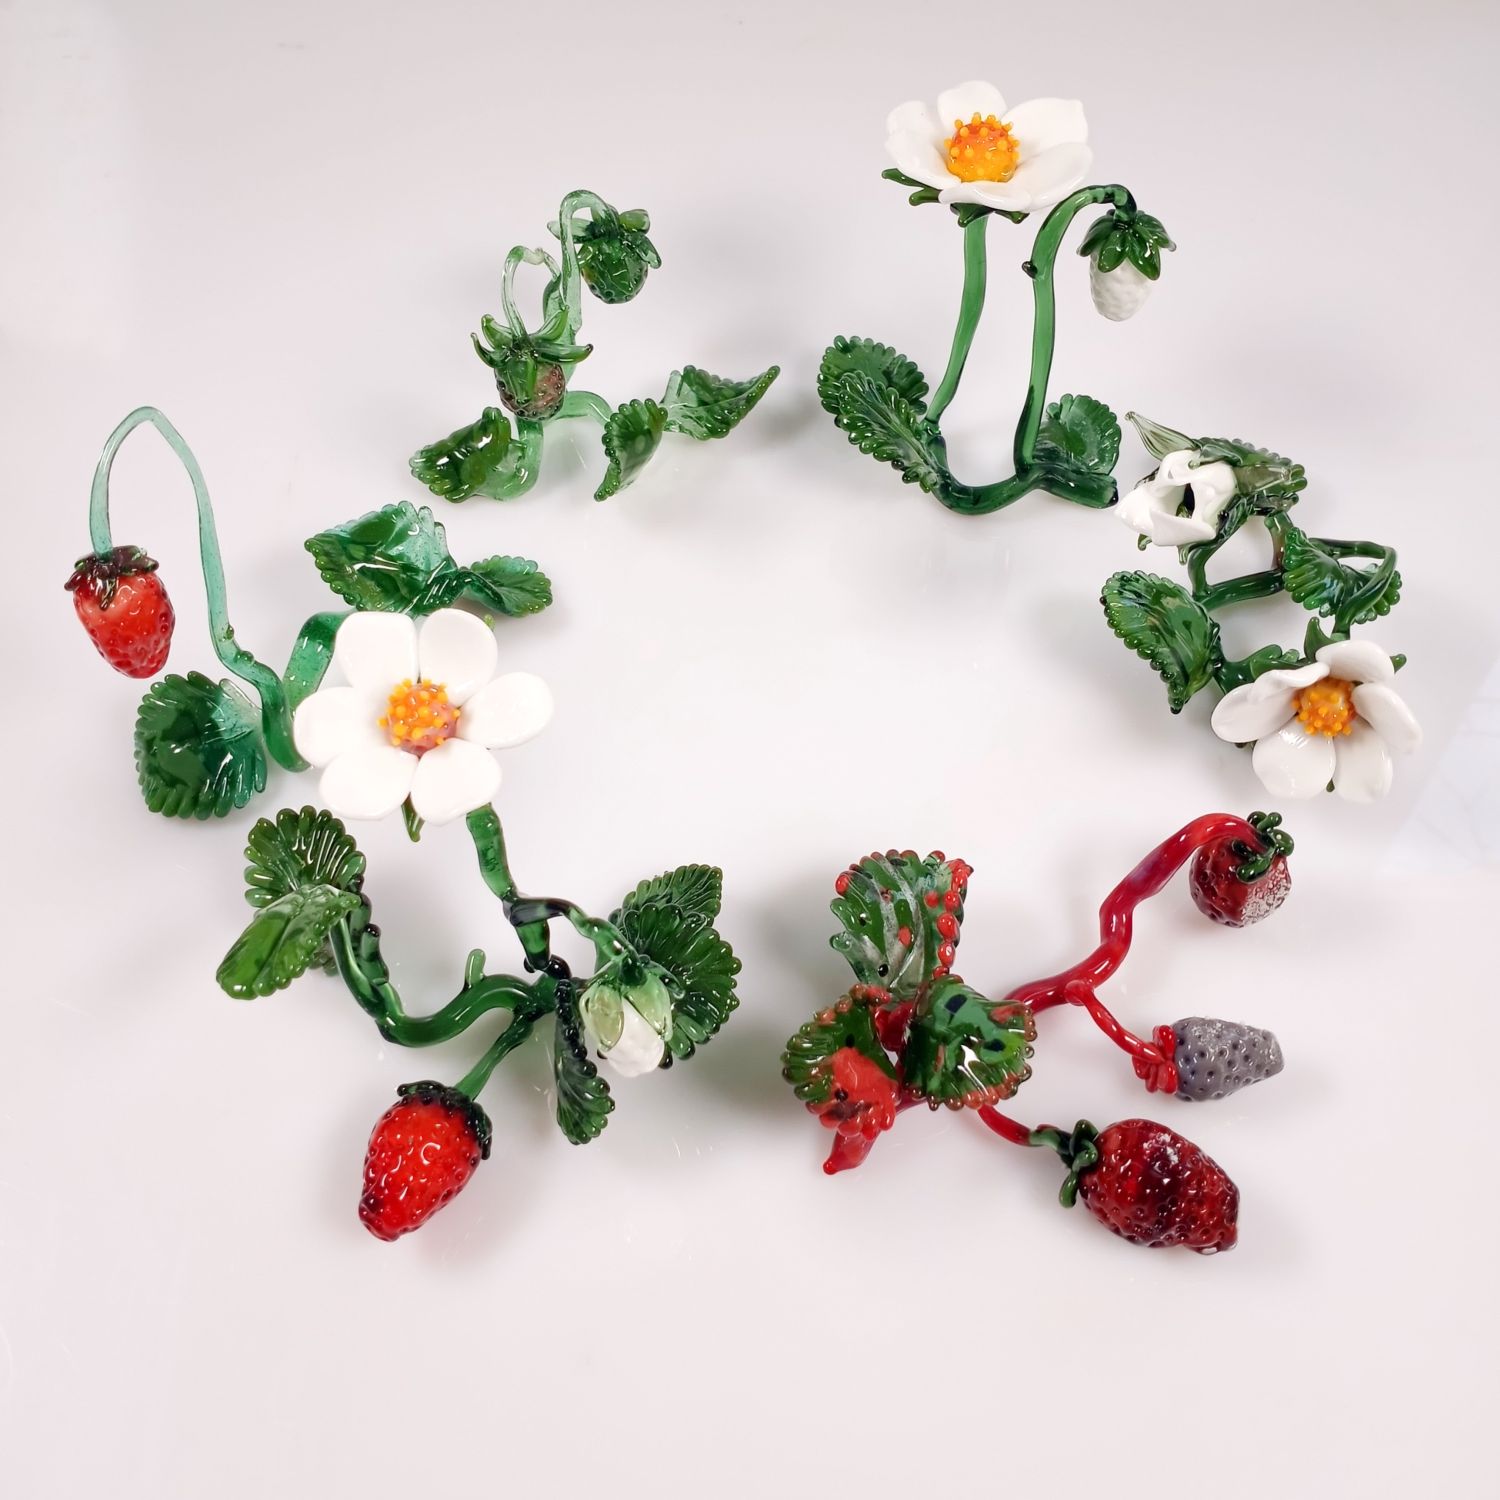 Nadia Tasci: Strawberry Patch – Not For Sale Product Image 1 of 3